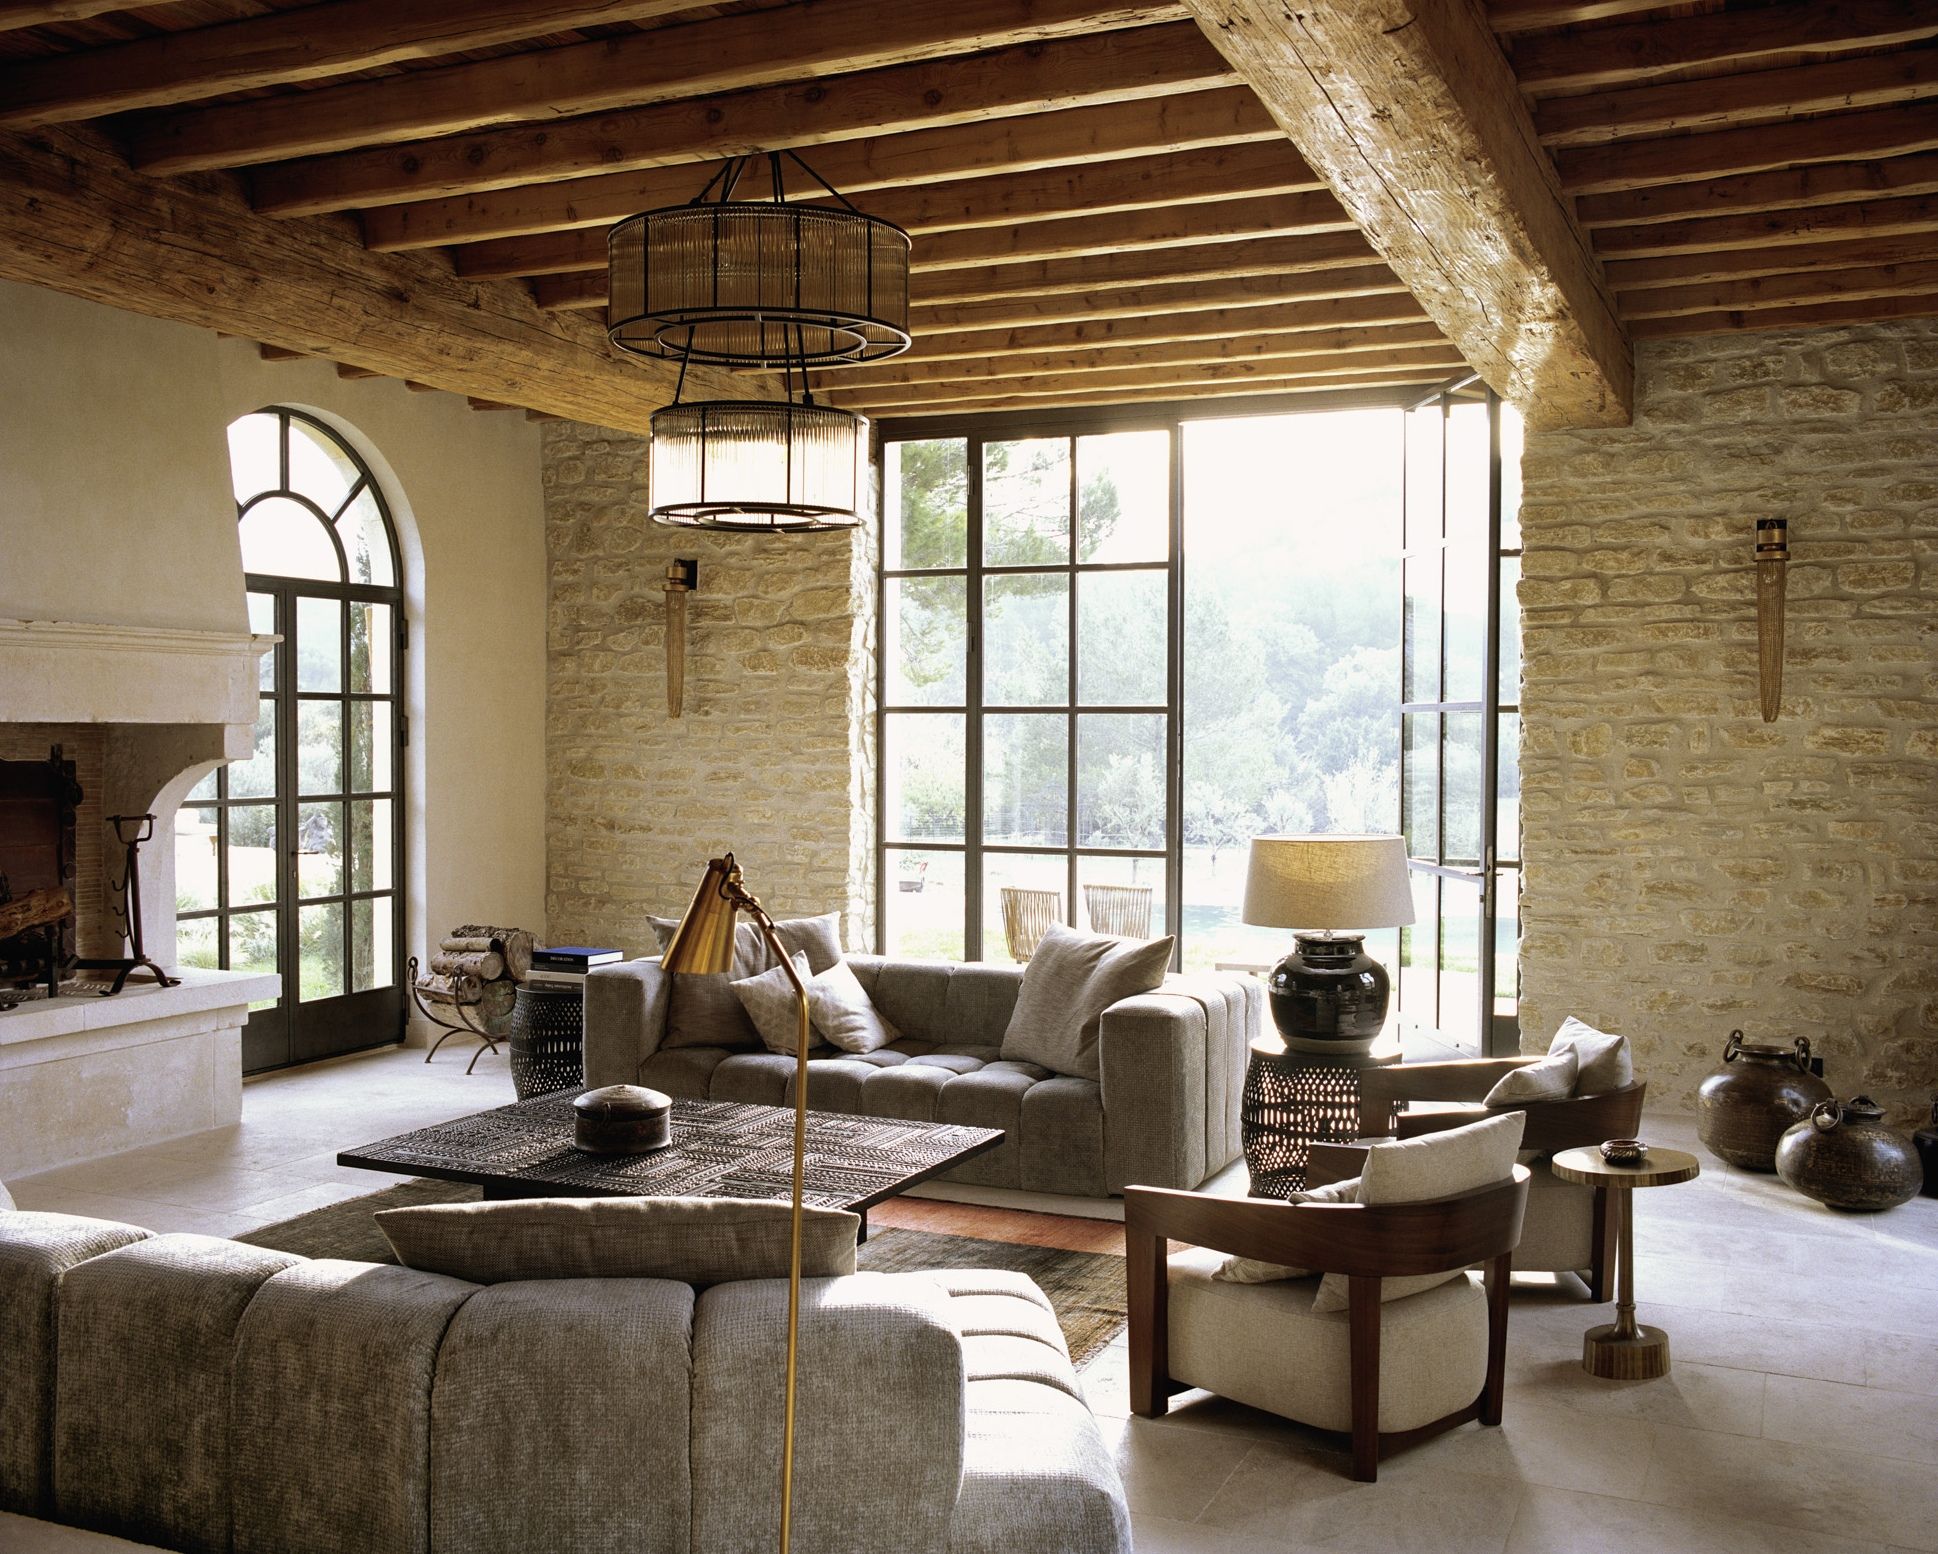 Les Moutons |A traditional Provence farmhouse in France - House-Diaries.com